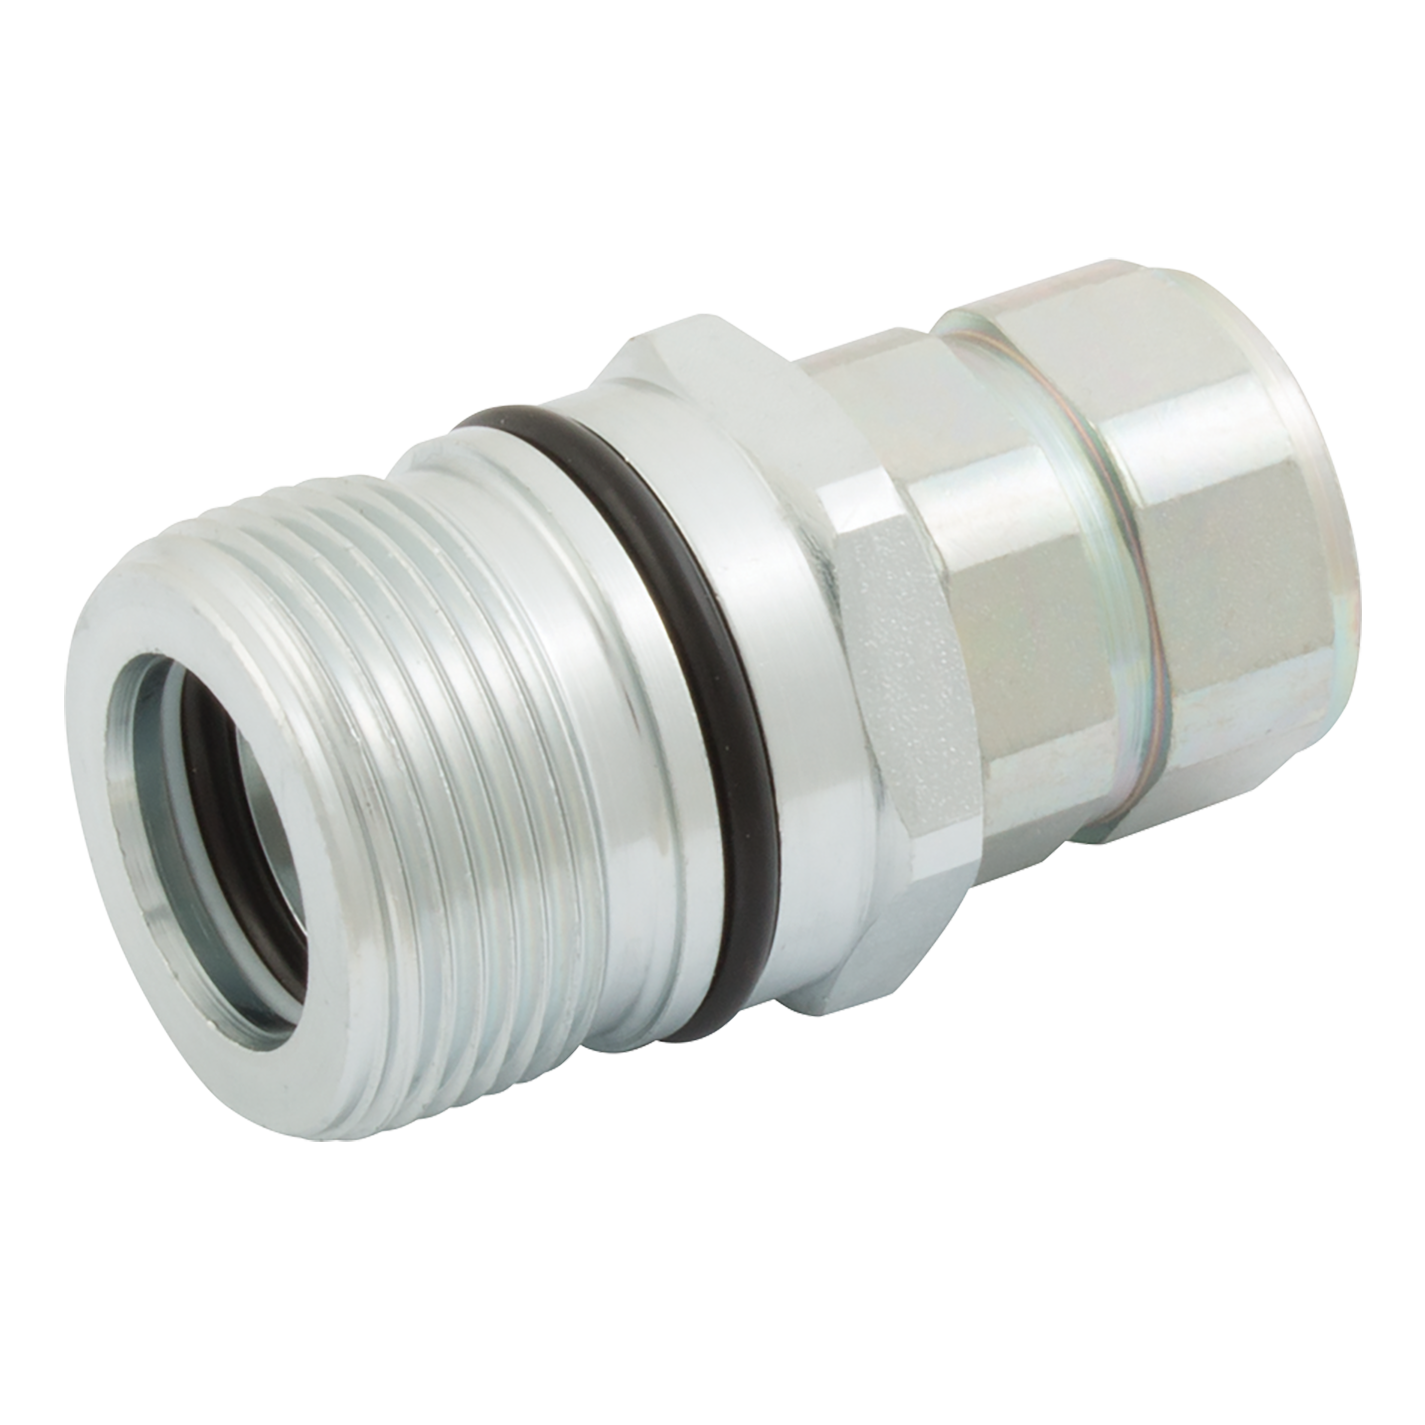 1/4" BSP Female Hydraulic Quick Release Coupling